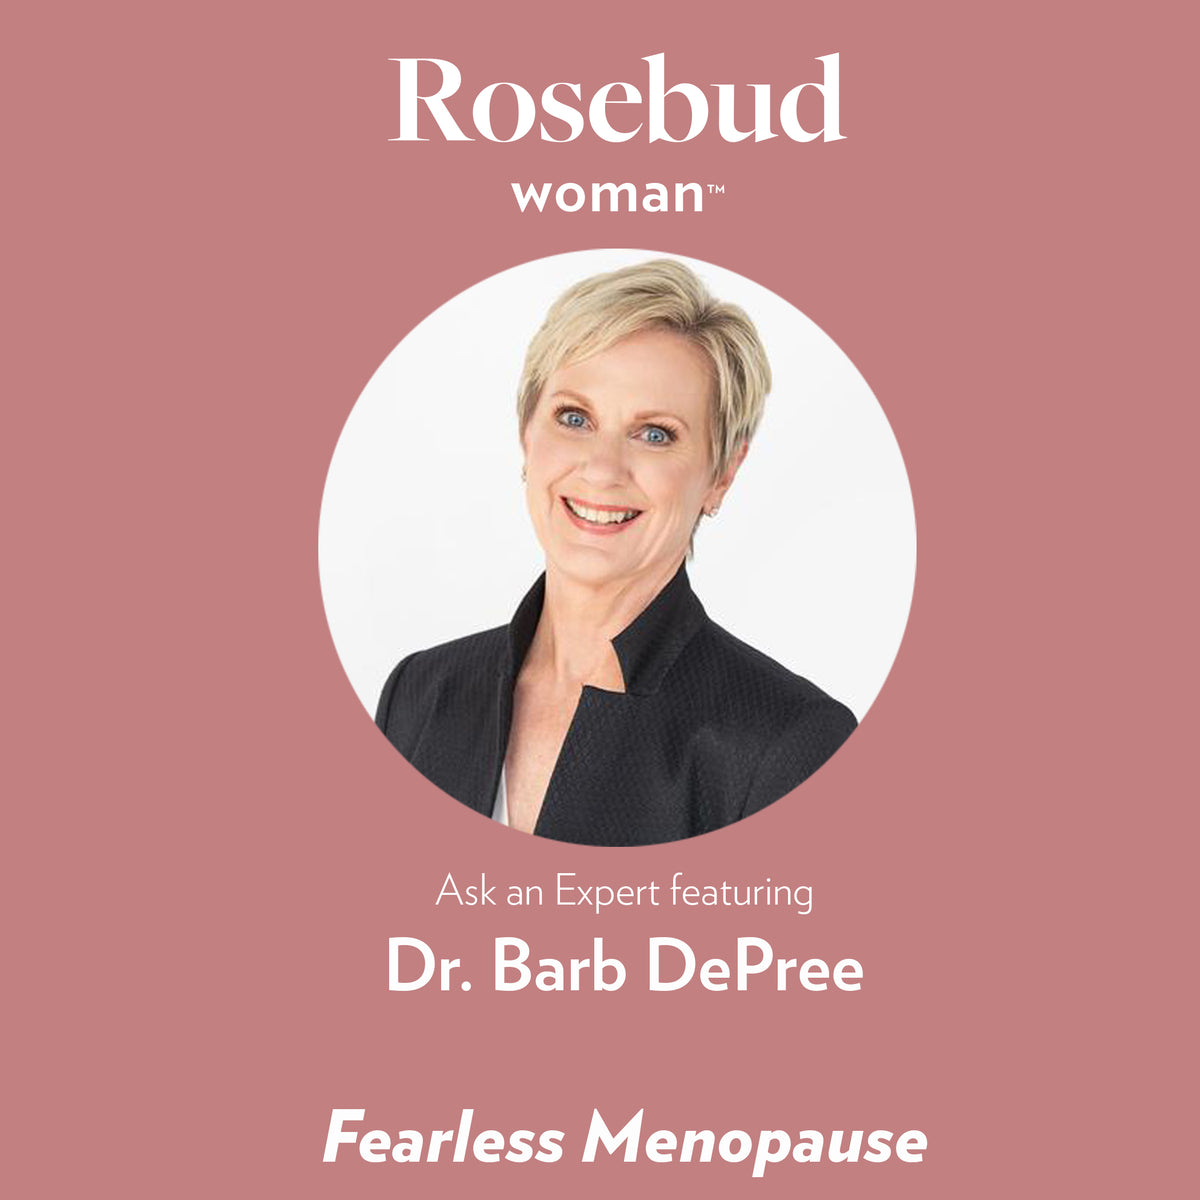 Fearless Menopause: An Interview with Dr. Barb DePree